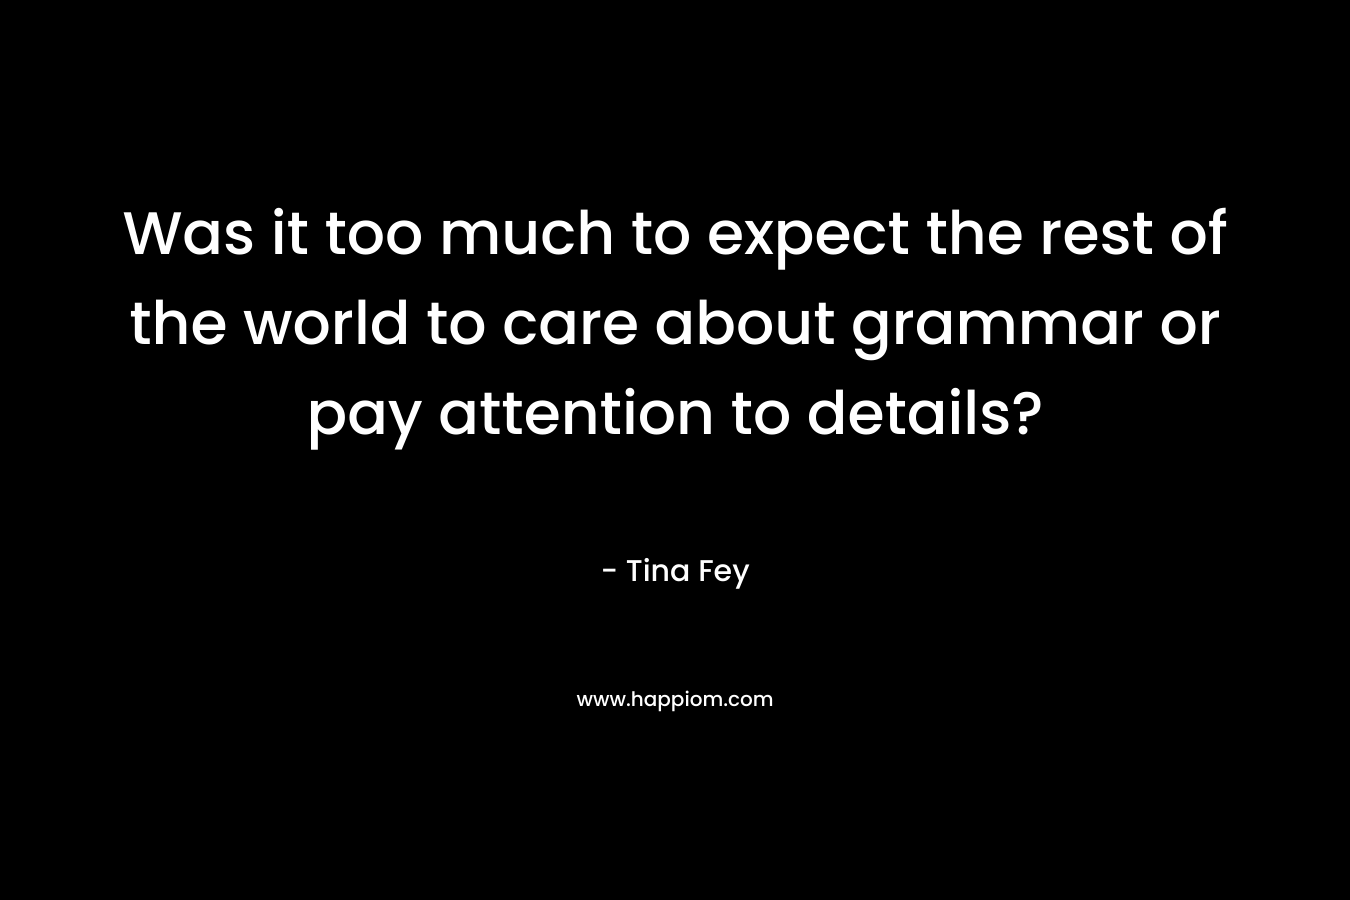 Was it too much to expect the rest of the world to care about grammar or pay attention to details? – Tina Fey